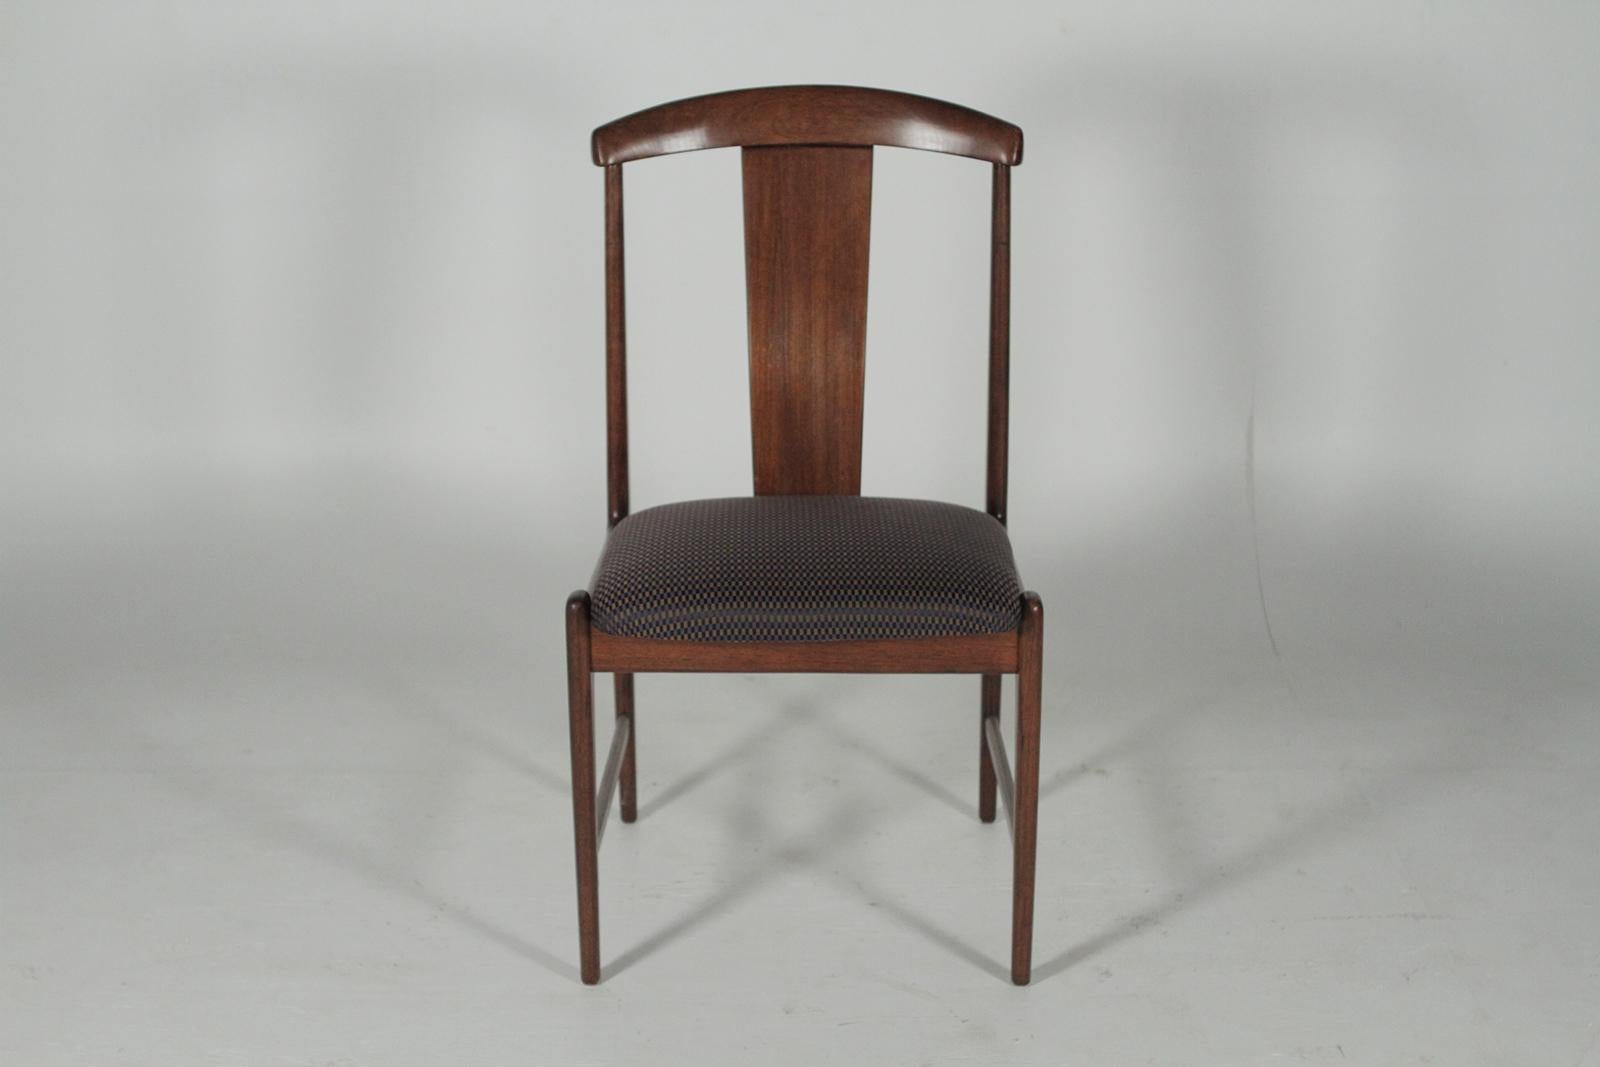 Set of four midcentury teak dining room chairs, 1950s, by Folke Ohlsson for DUX.
Very nice lines and in very good condition.
 Dimensions: 19.5